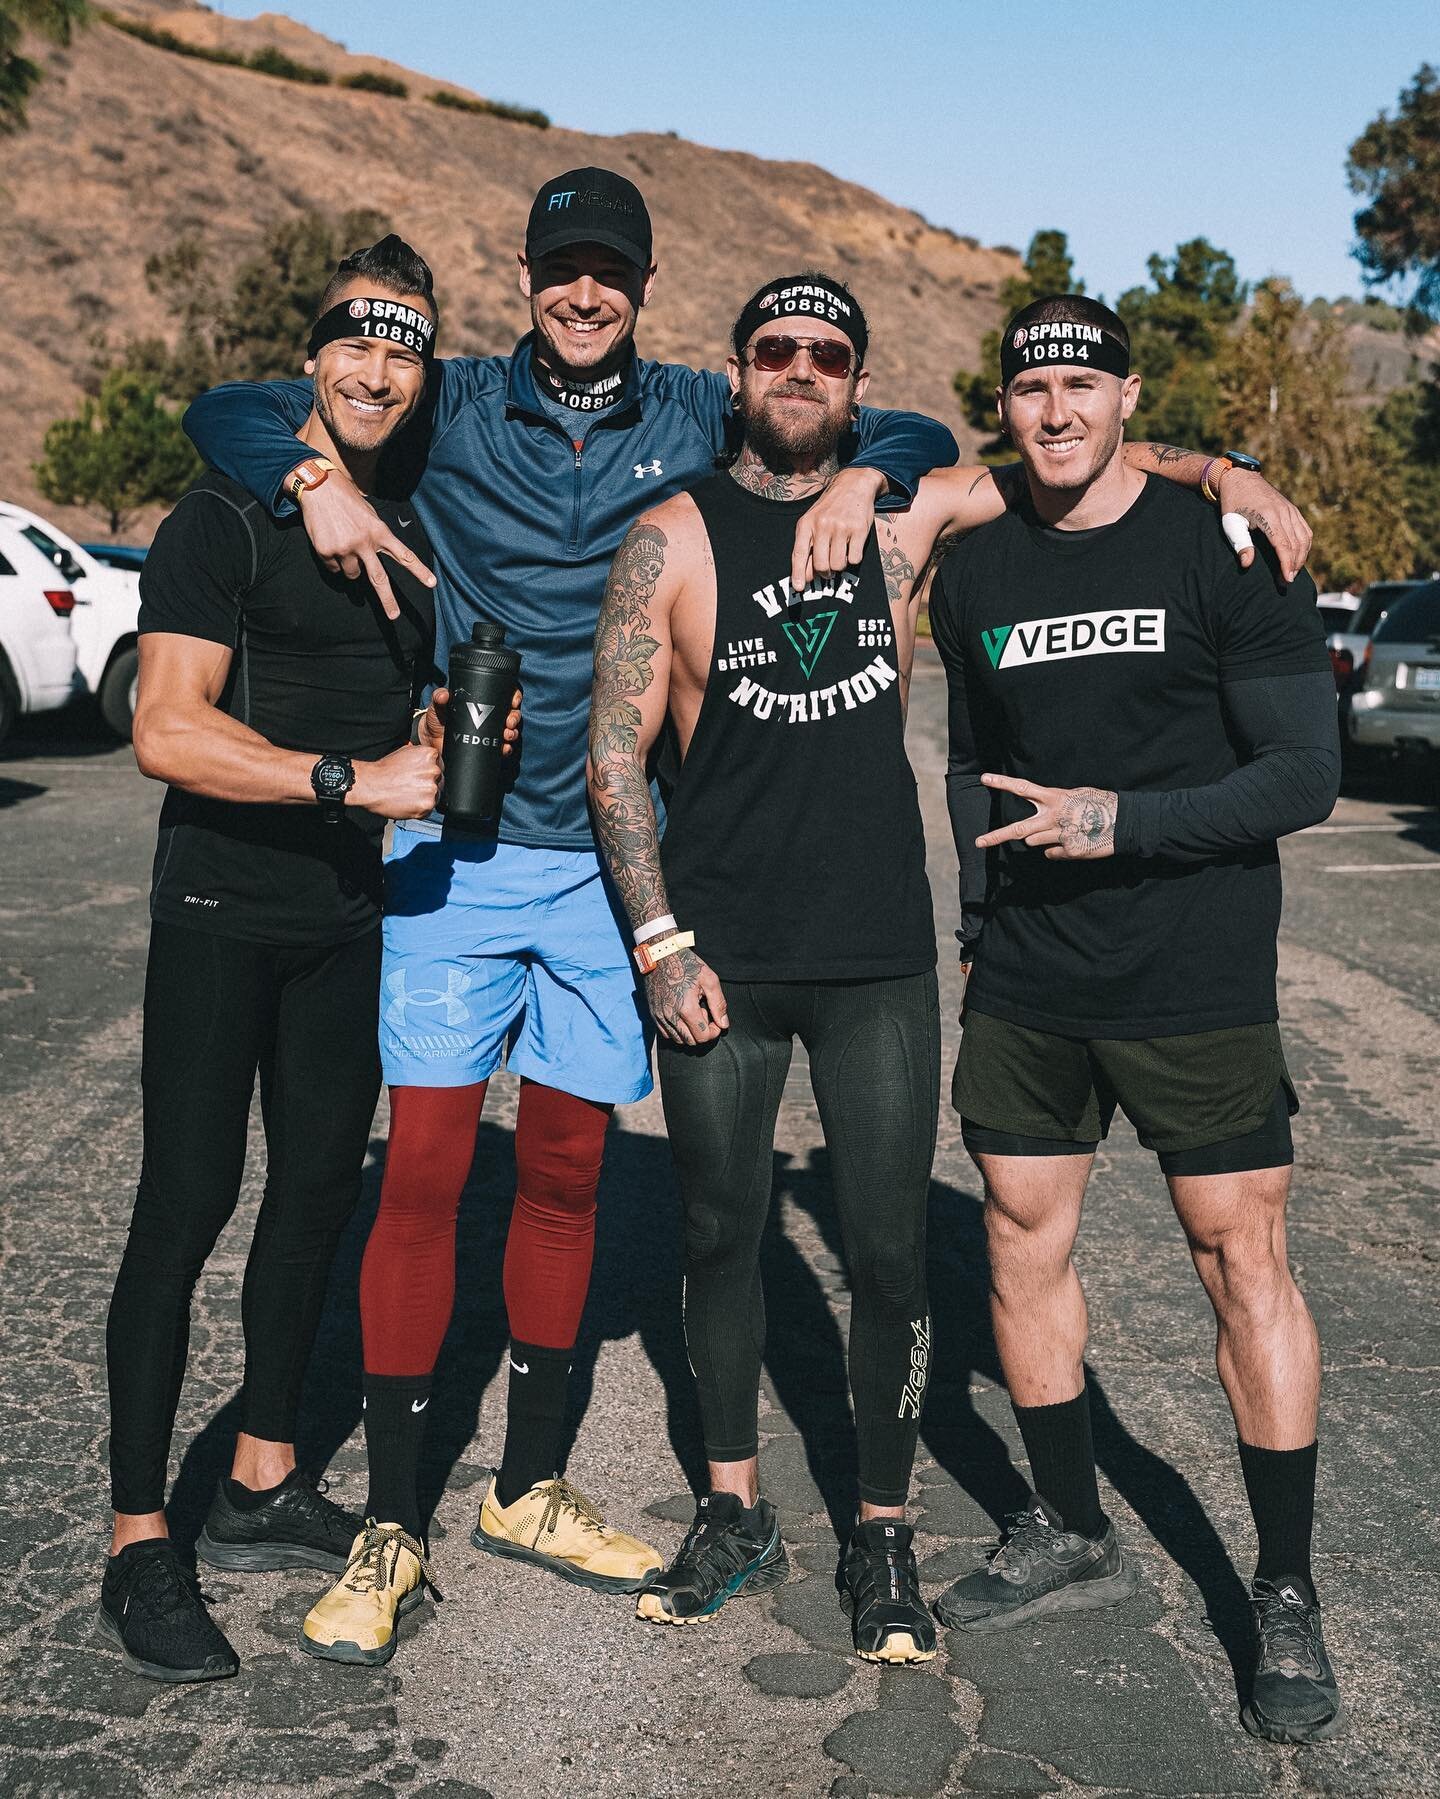 What happens when Vegan Athletes get together?

They go do a @Spartan Obstacle Course Race together!

And before the race, they dry-scoop @vedgenutrition Pre-Workout &amp; Nitro Pump because that is what Fit Vegan Savages do!

Such an epic time with 